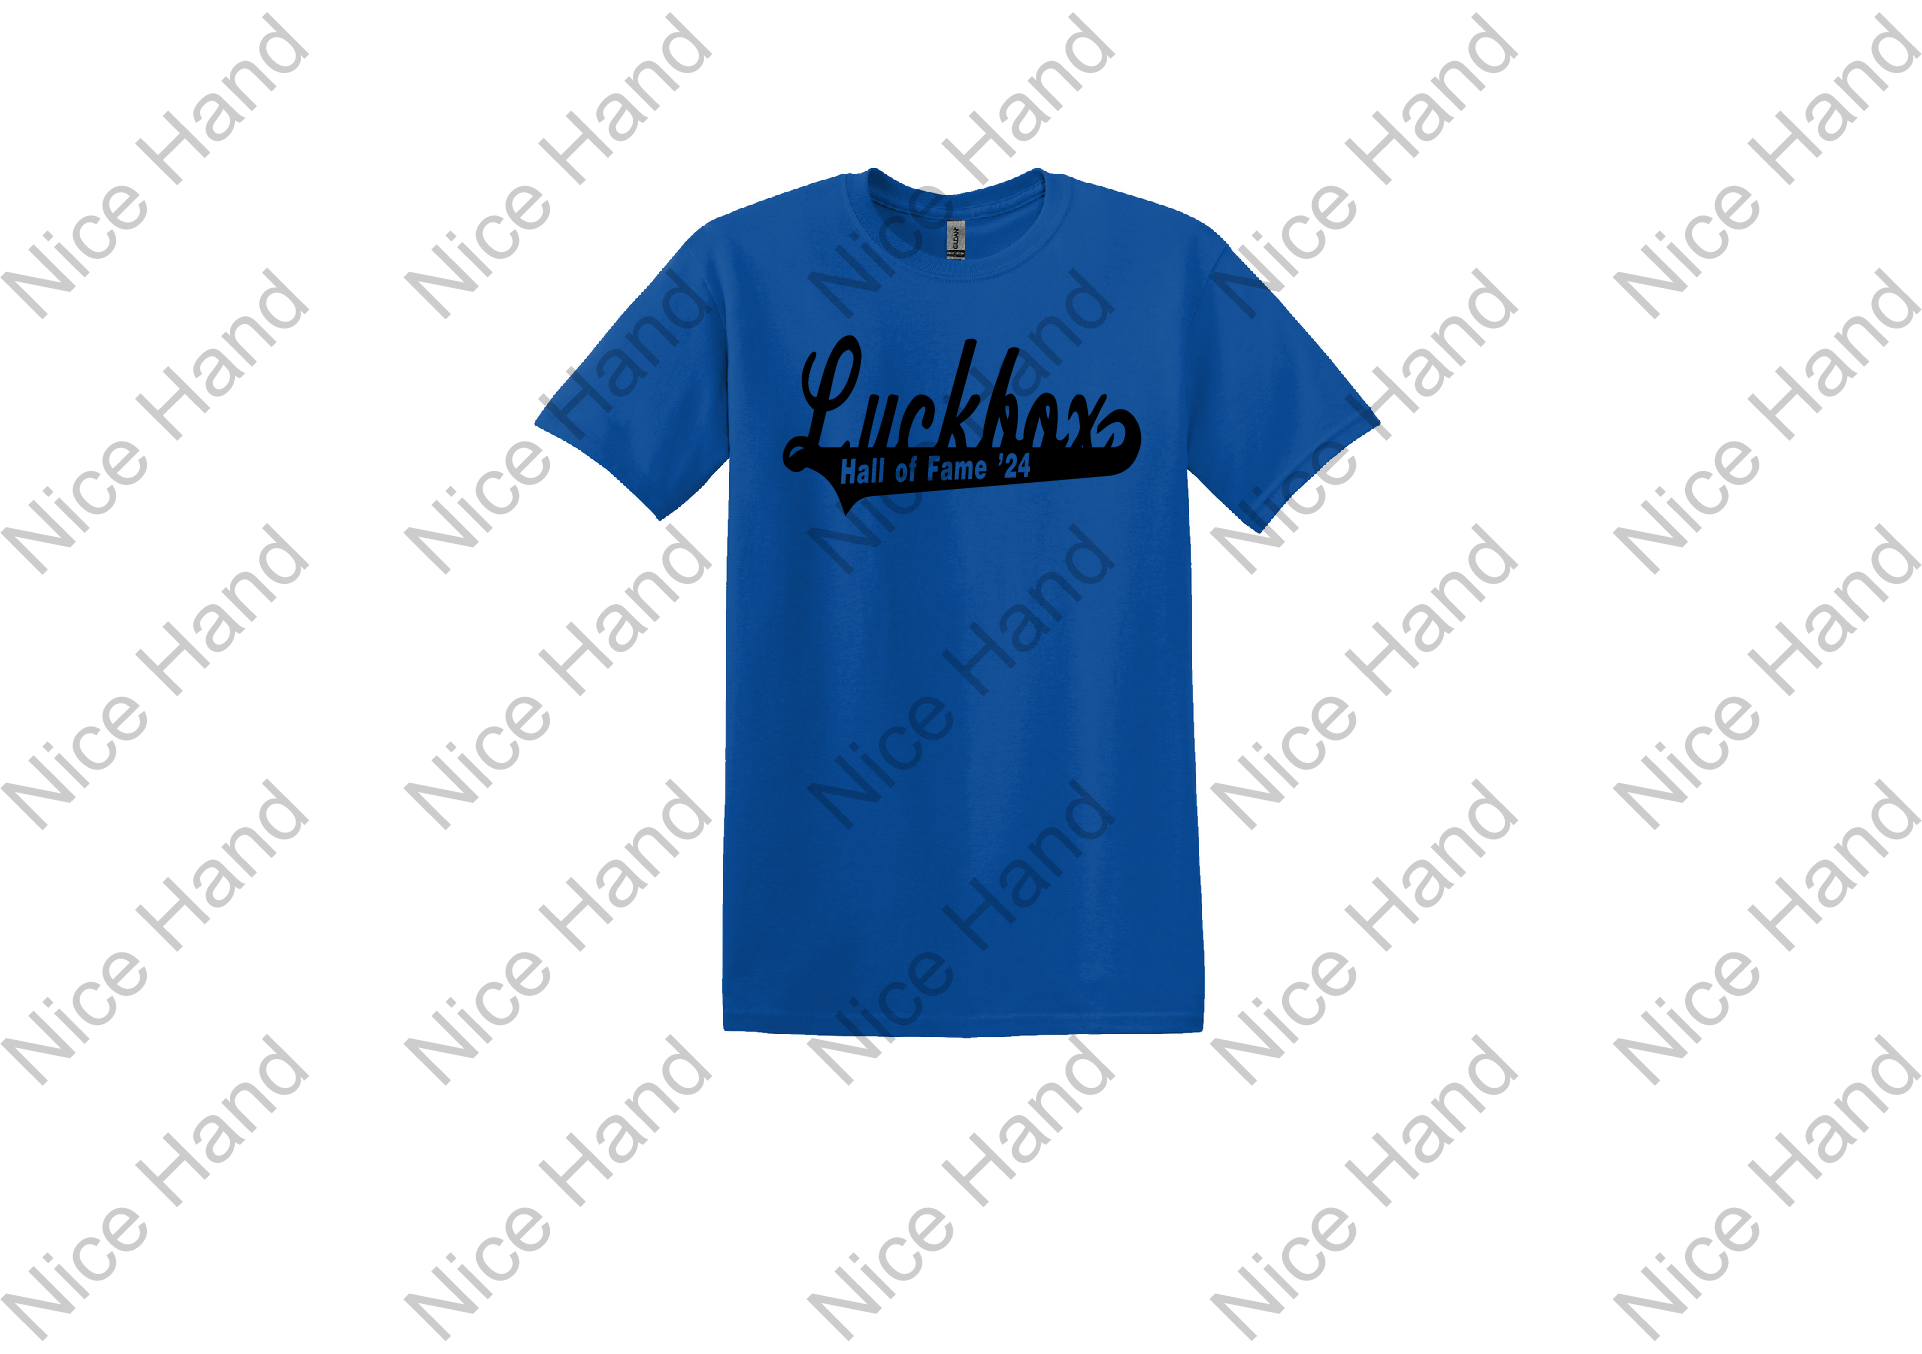 Luckbox hall of fame. Blue with Black Lettering